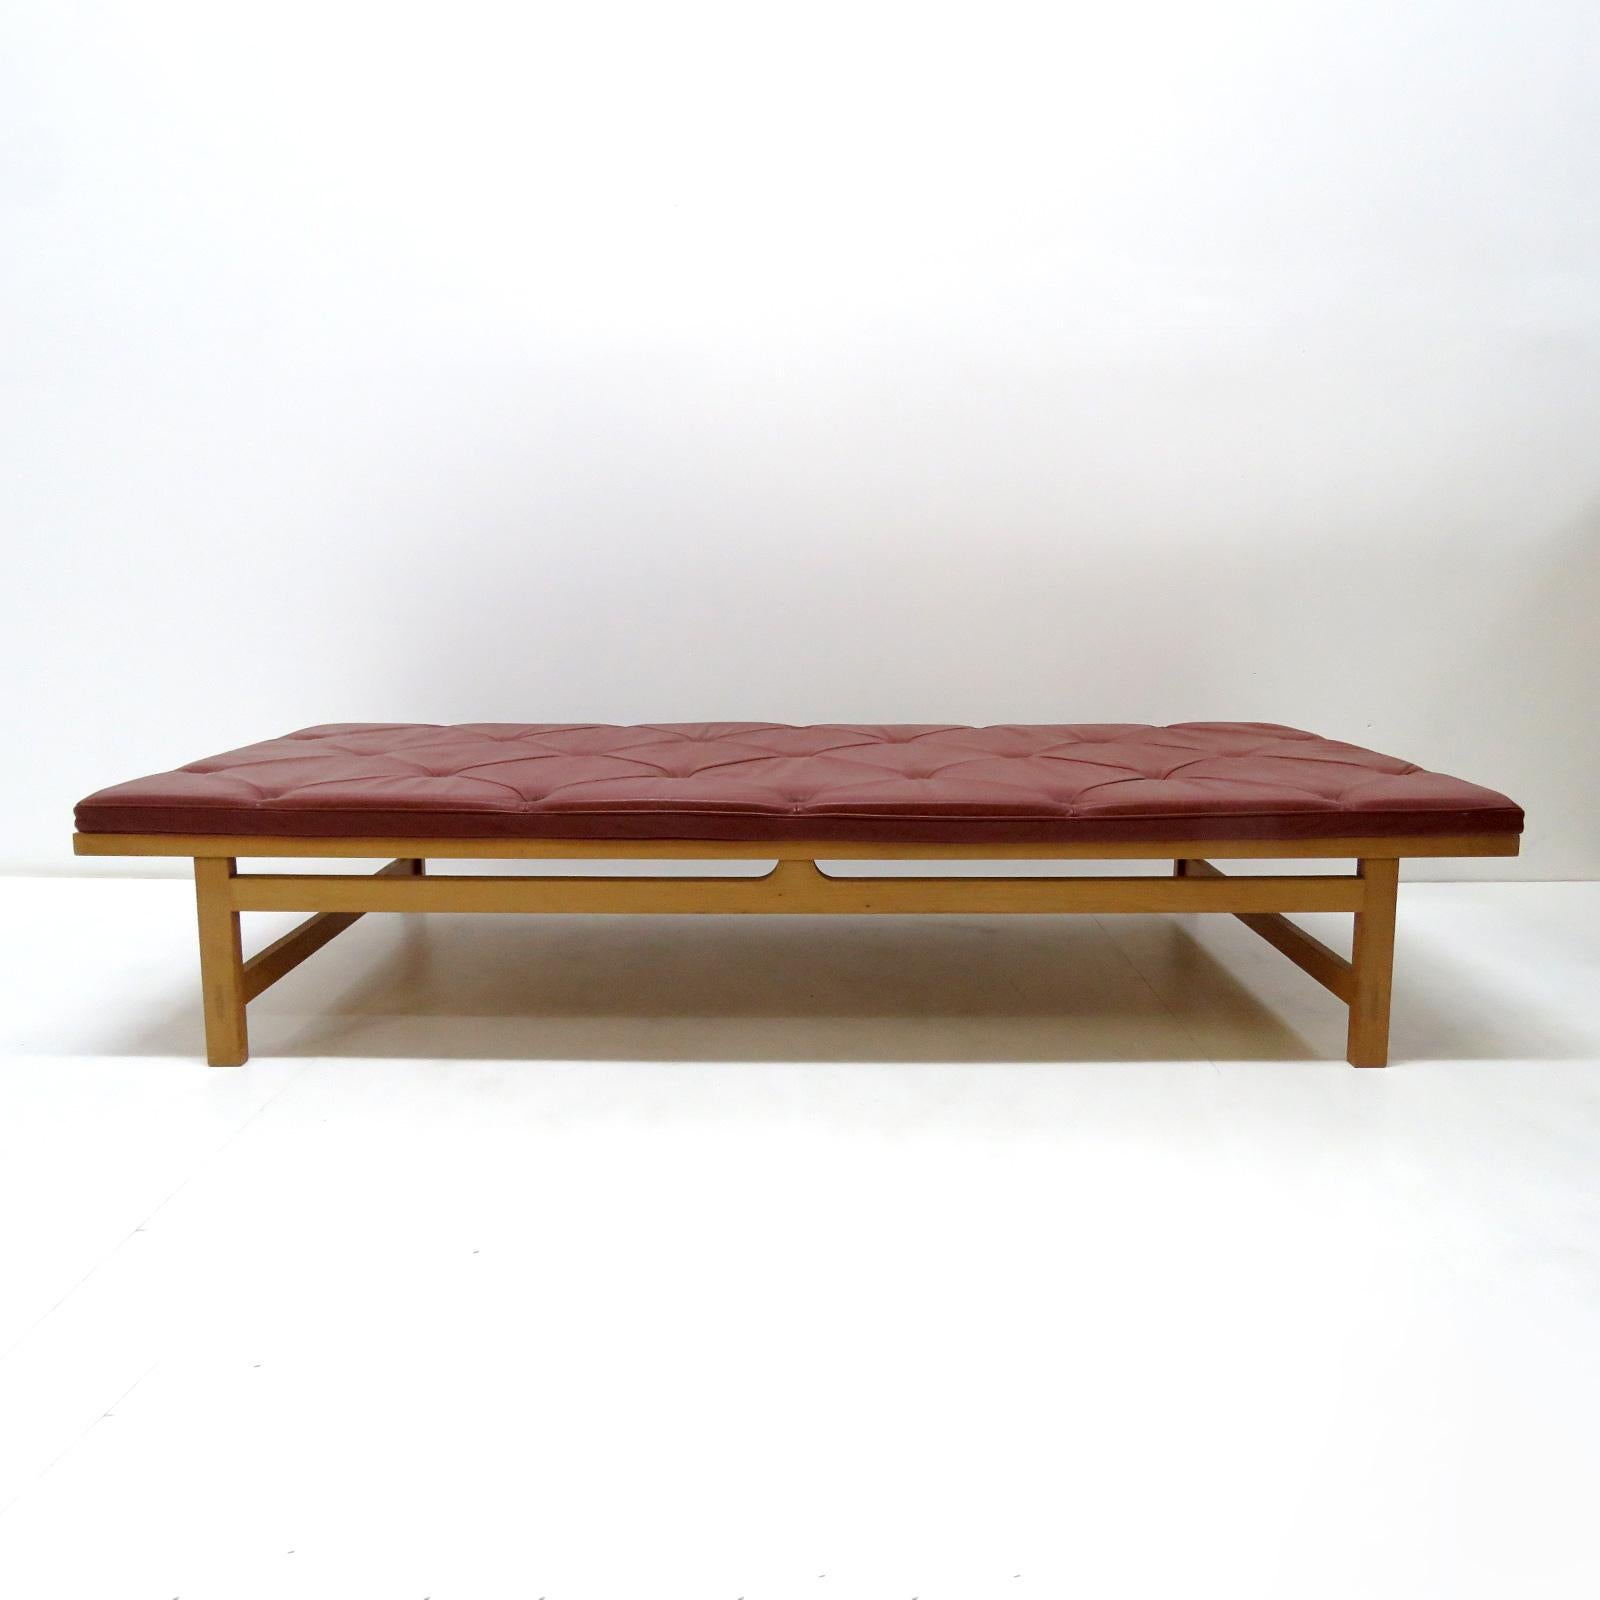 Stunning, rare daybed designed by Rud Thygesen & Johnny Sørensen for Botium in 1989, frame in cherrywood with French wicker backing and a red, maroon/burgundy colored tufted leather seat cushion, part of the ‘King’ series designed in 1969 as gifts